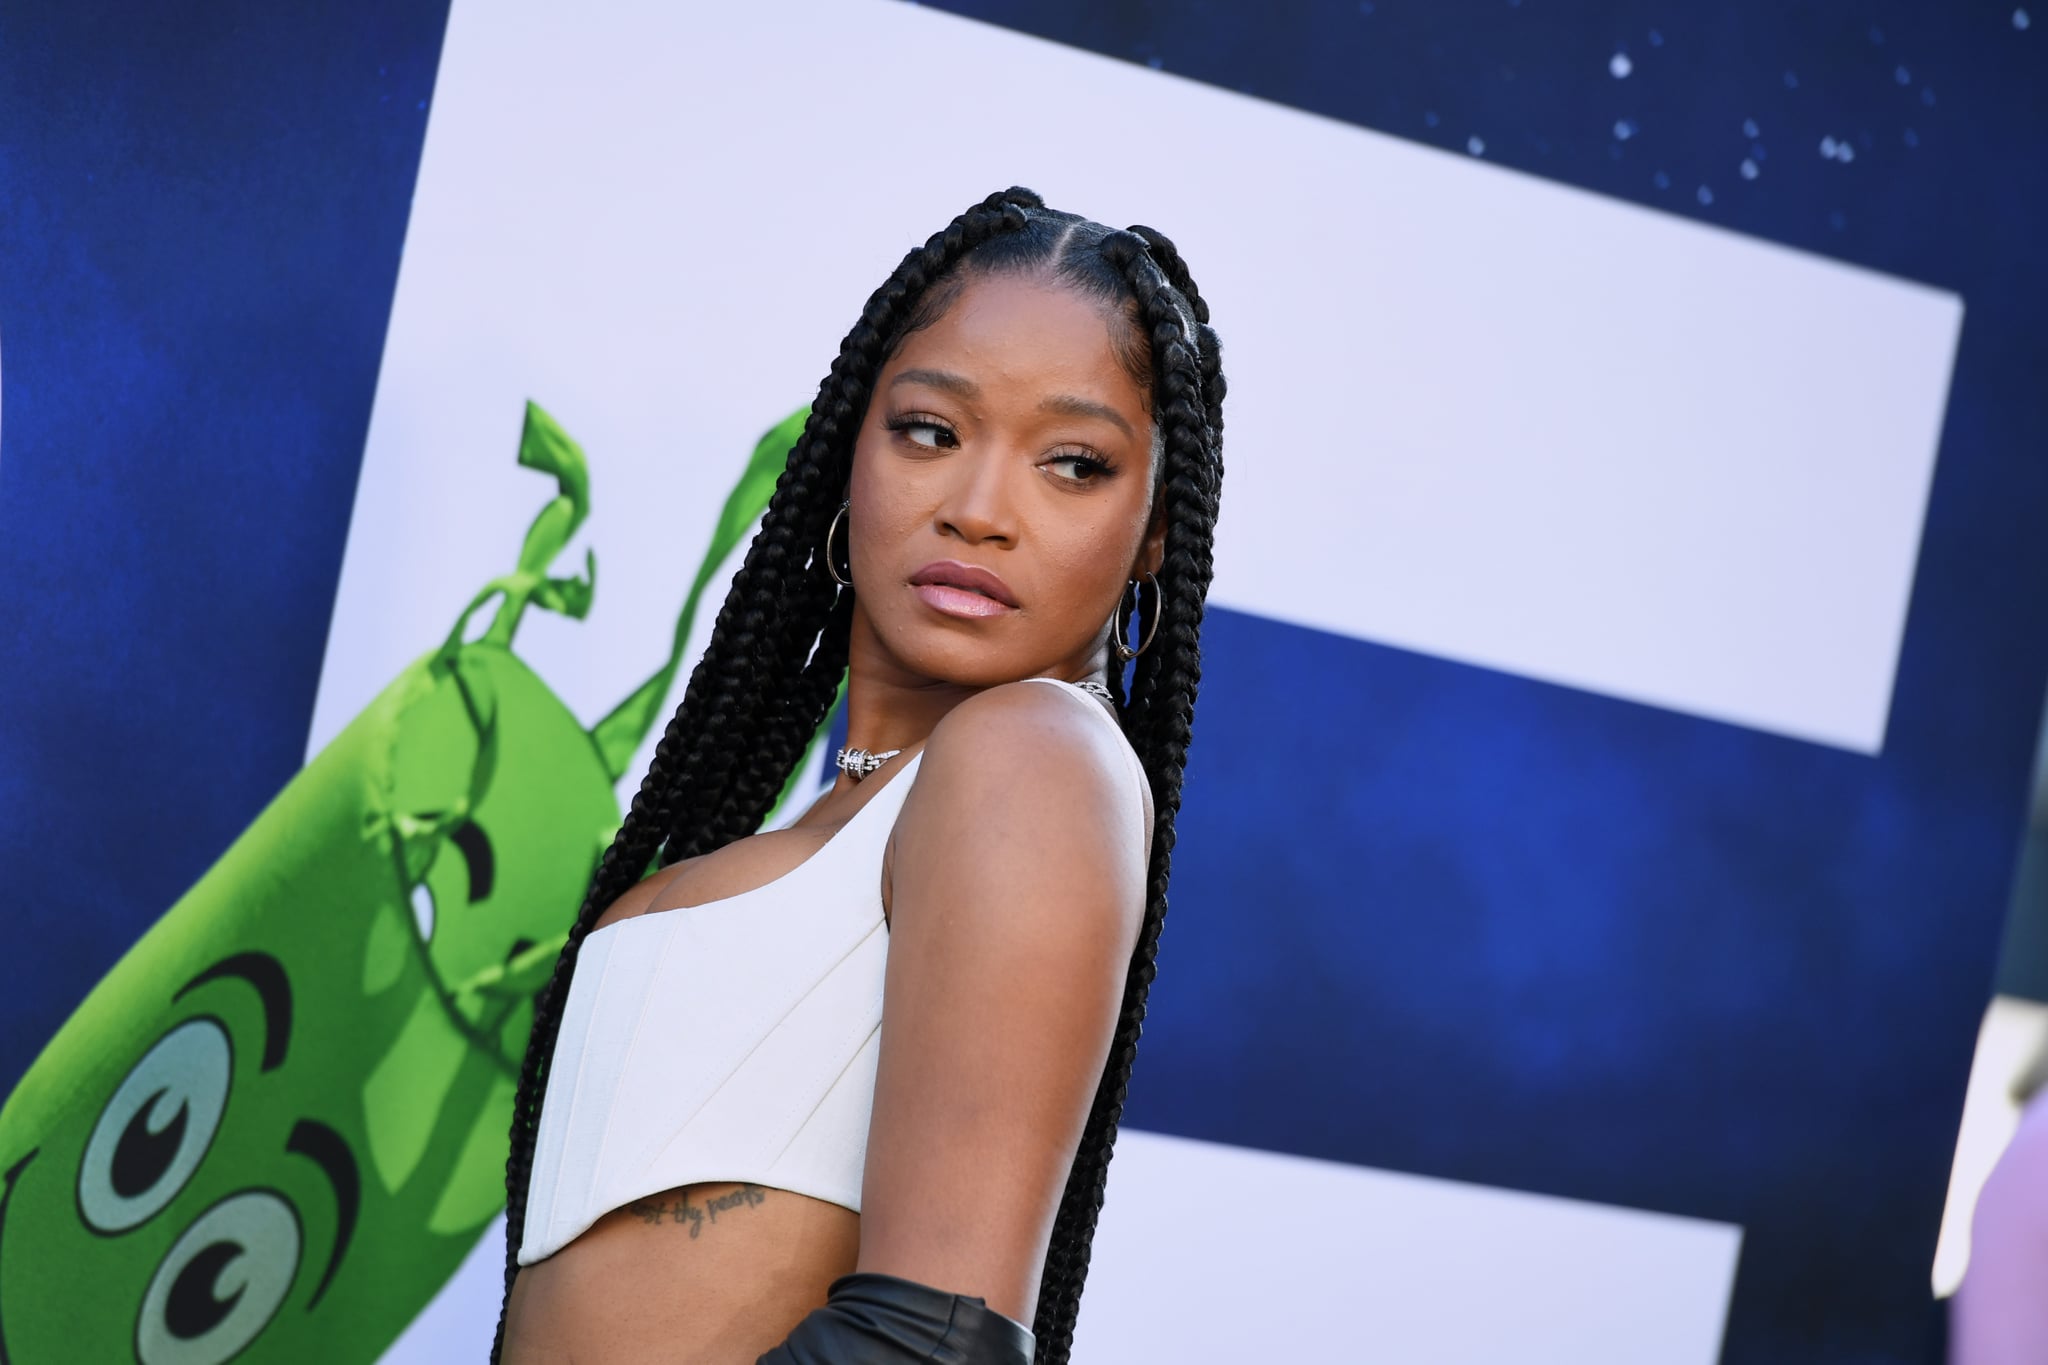 HOLLYWOOD, CALIFORNIA - JULY 18: Keke Palmer attends the world premiere of Universal Pictures' 